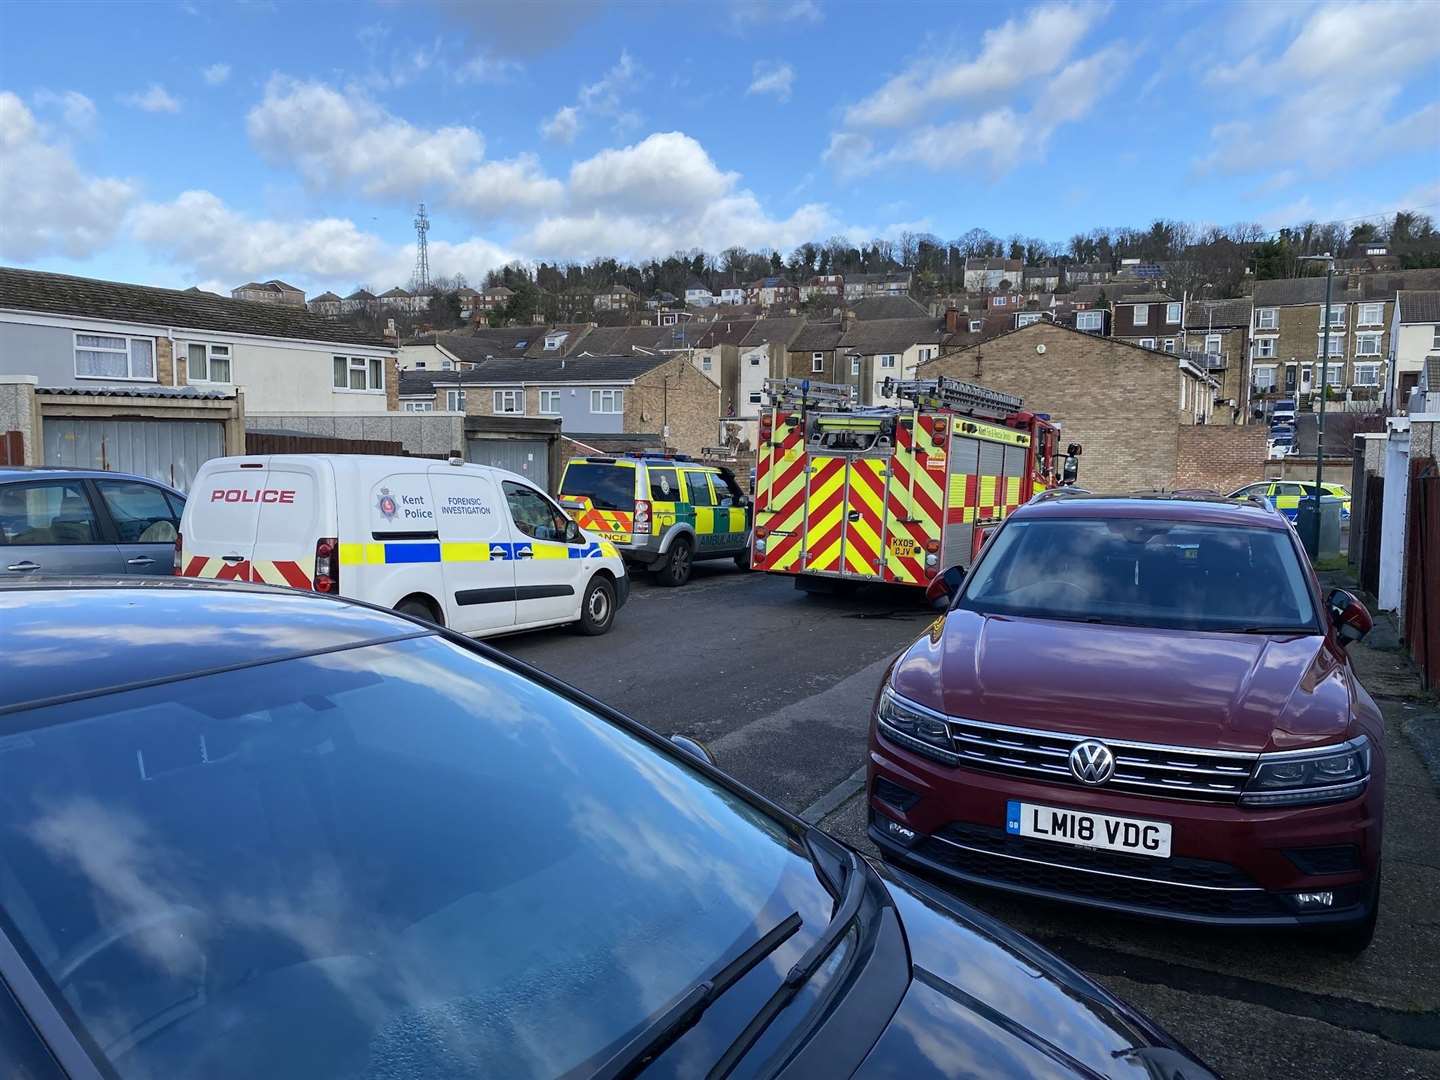 Neighbours have spotted police cars, ambulances, forensic vans, and ambulances at the scene